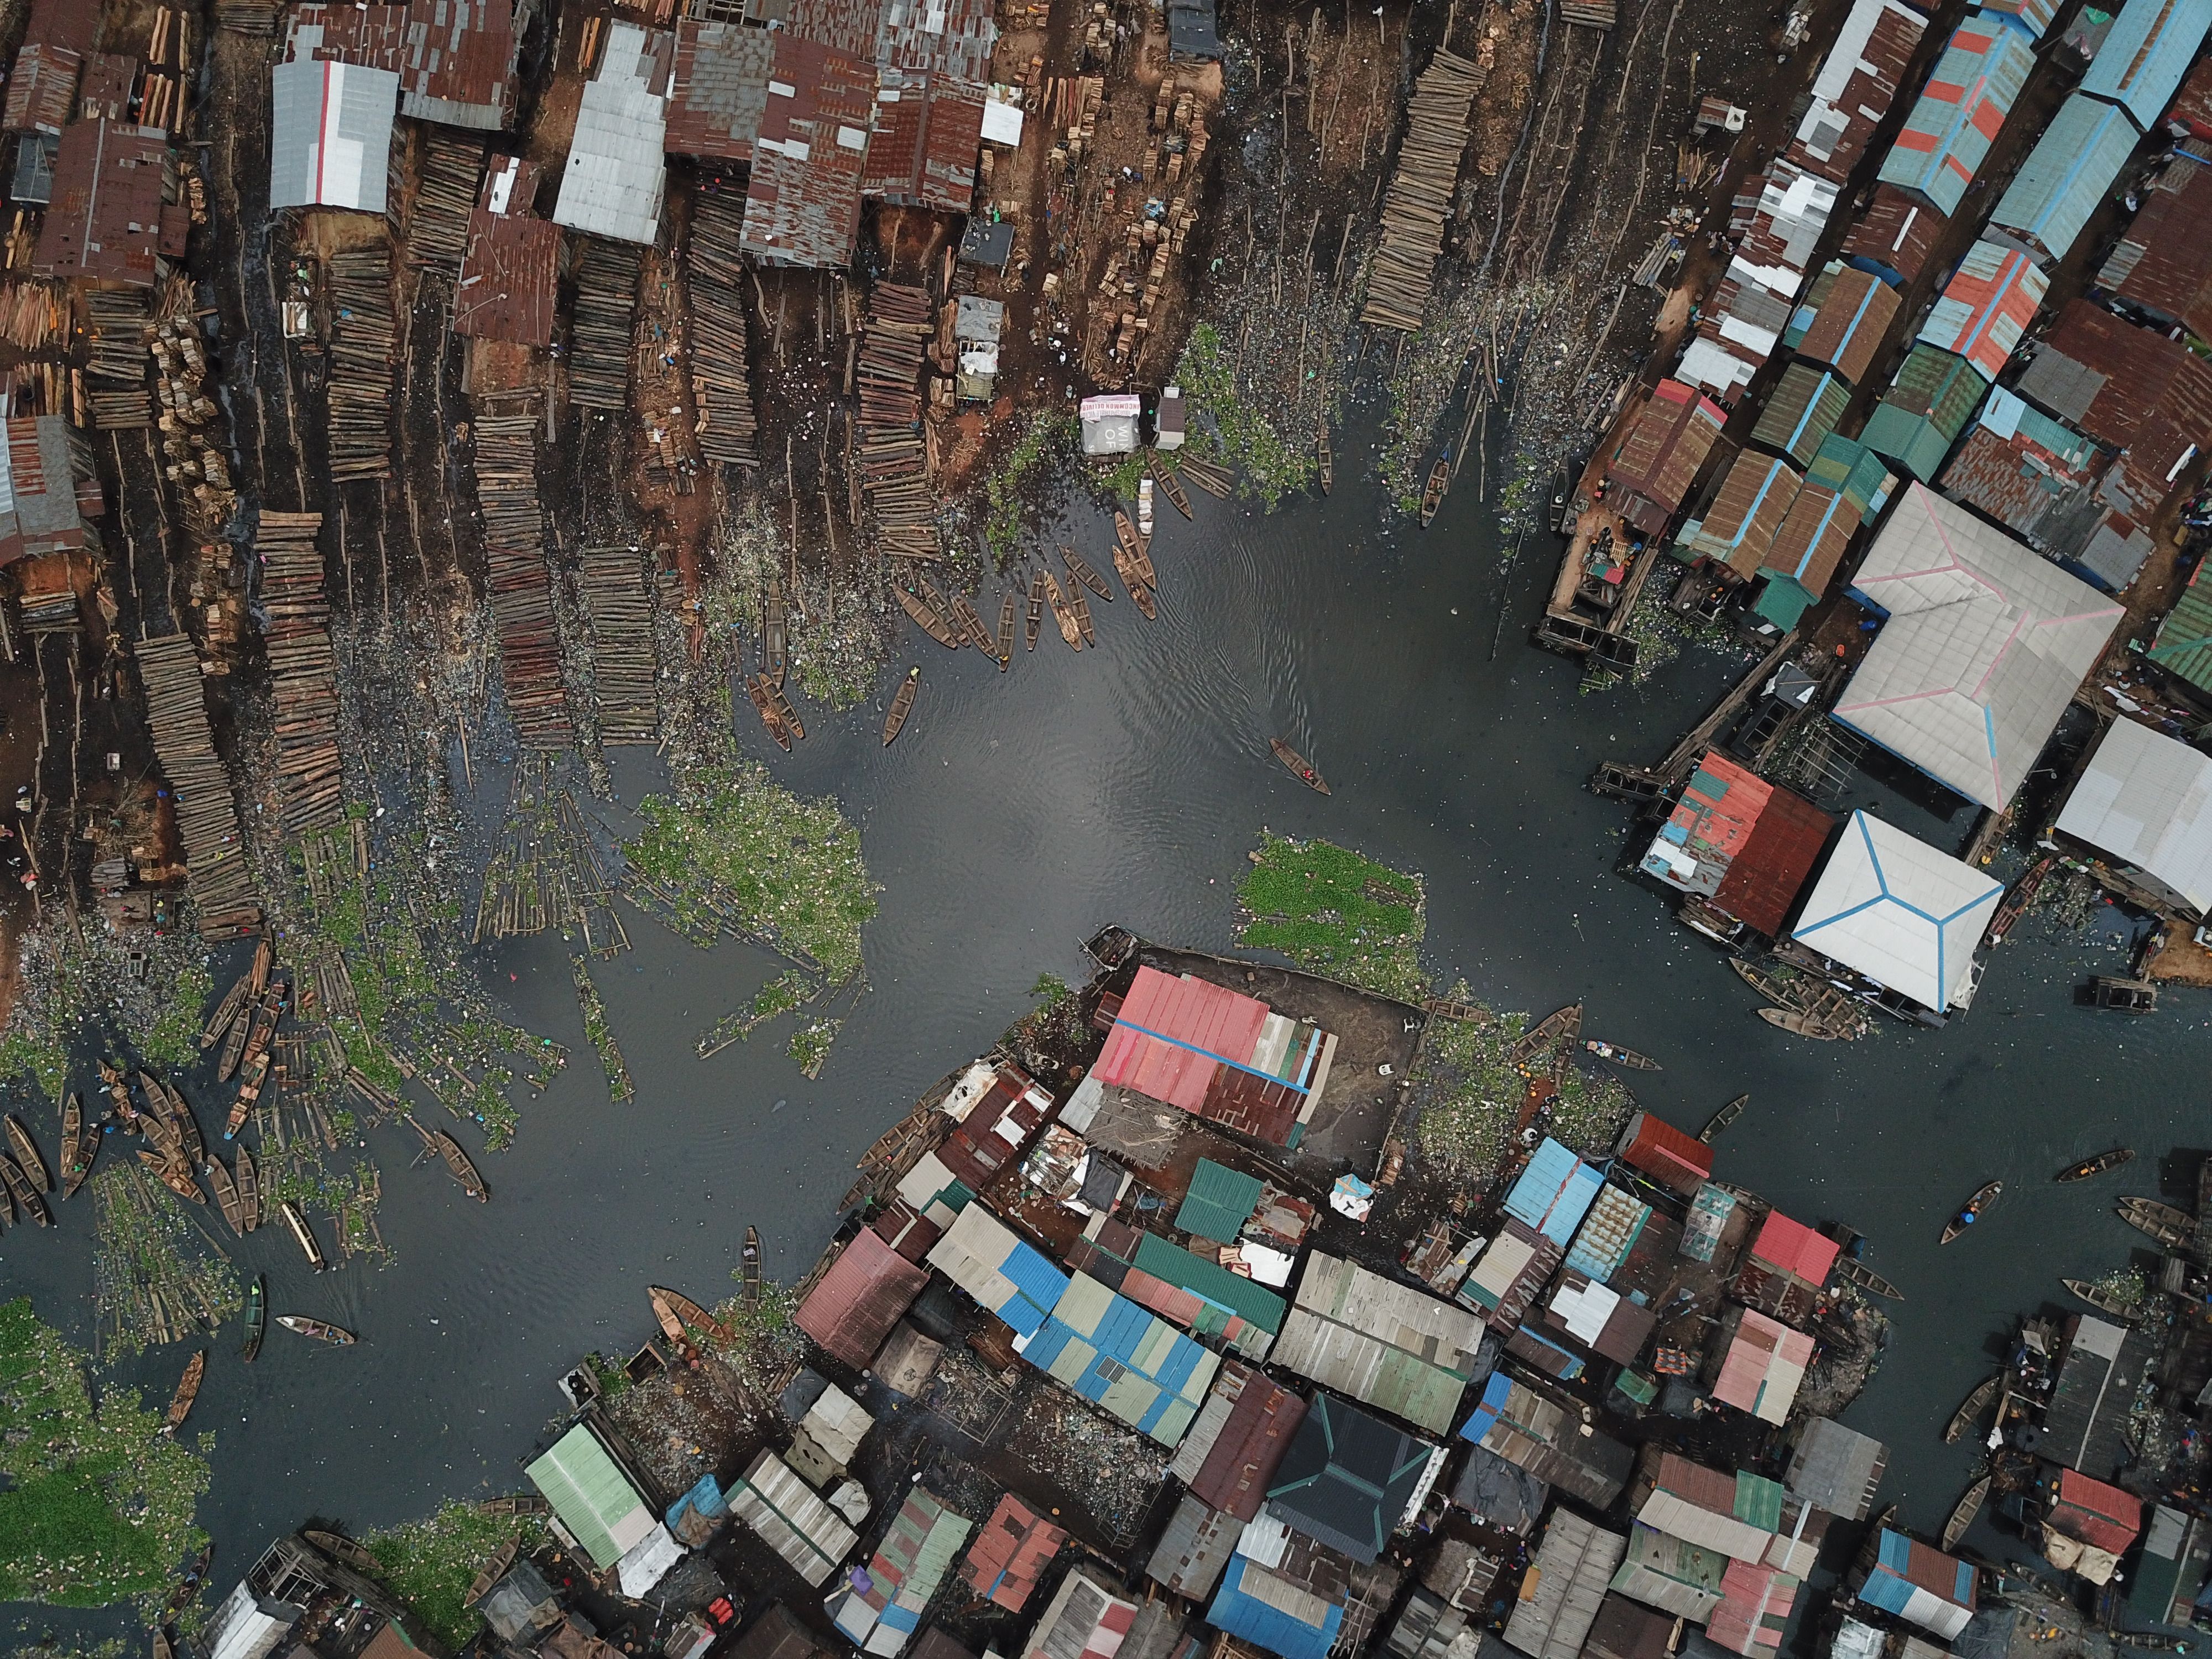 A drone image of Makoko. Image by UHURULABS / Code for Africa. Nigeria, undated.